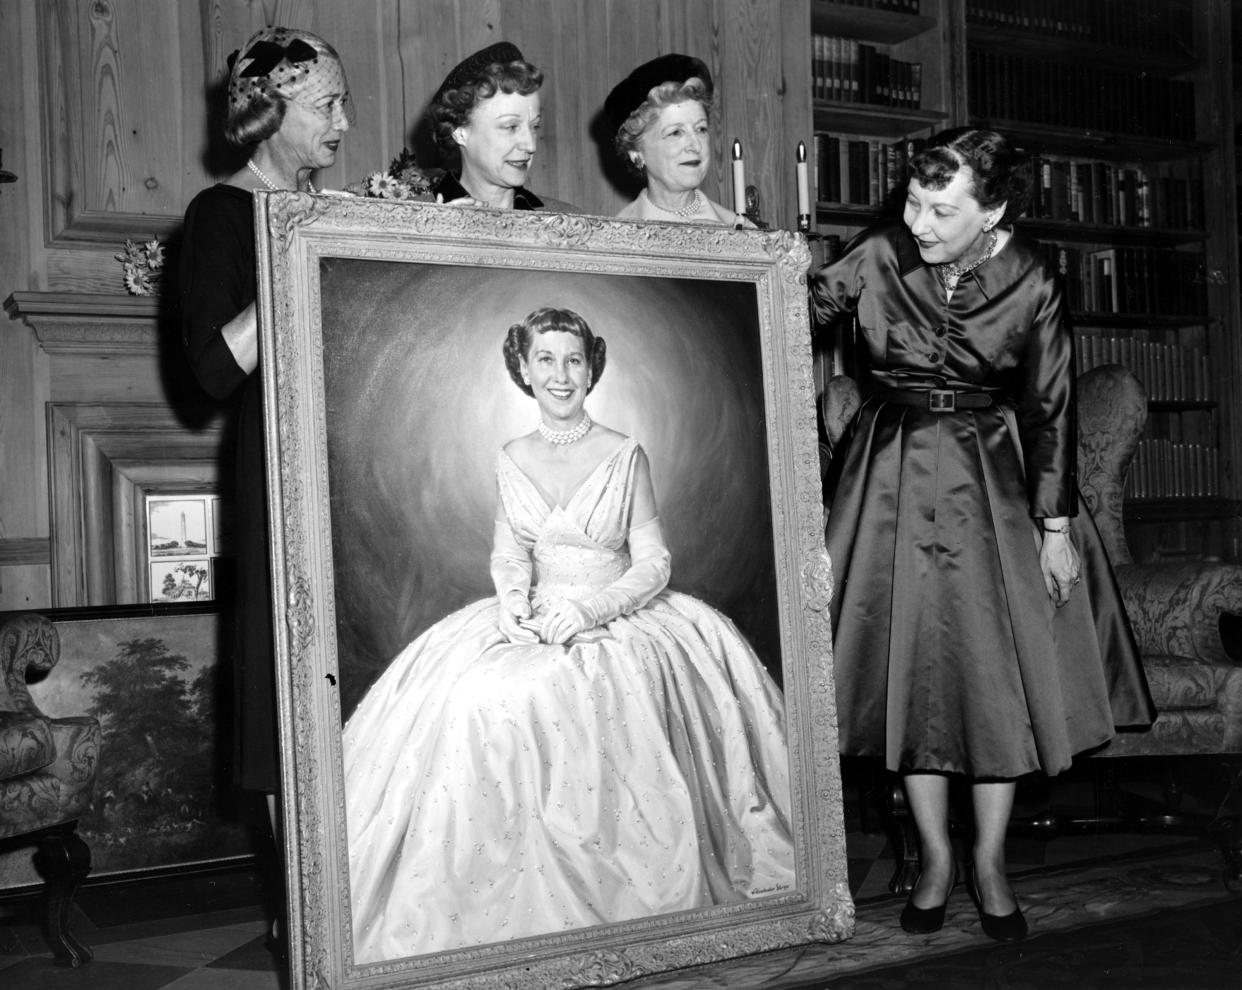 First Lady Mamie Eisenhower looks at an oil painting of herself, a gift for her sixtieth birthday, in the White House Library in Washington, D.C., Nov. 14, 1956. In the portrait, the first lady is wearing the pink gown worn at the inauguration ball. - Credit: ASSOCIATED PRESS